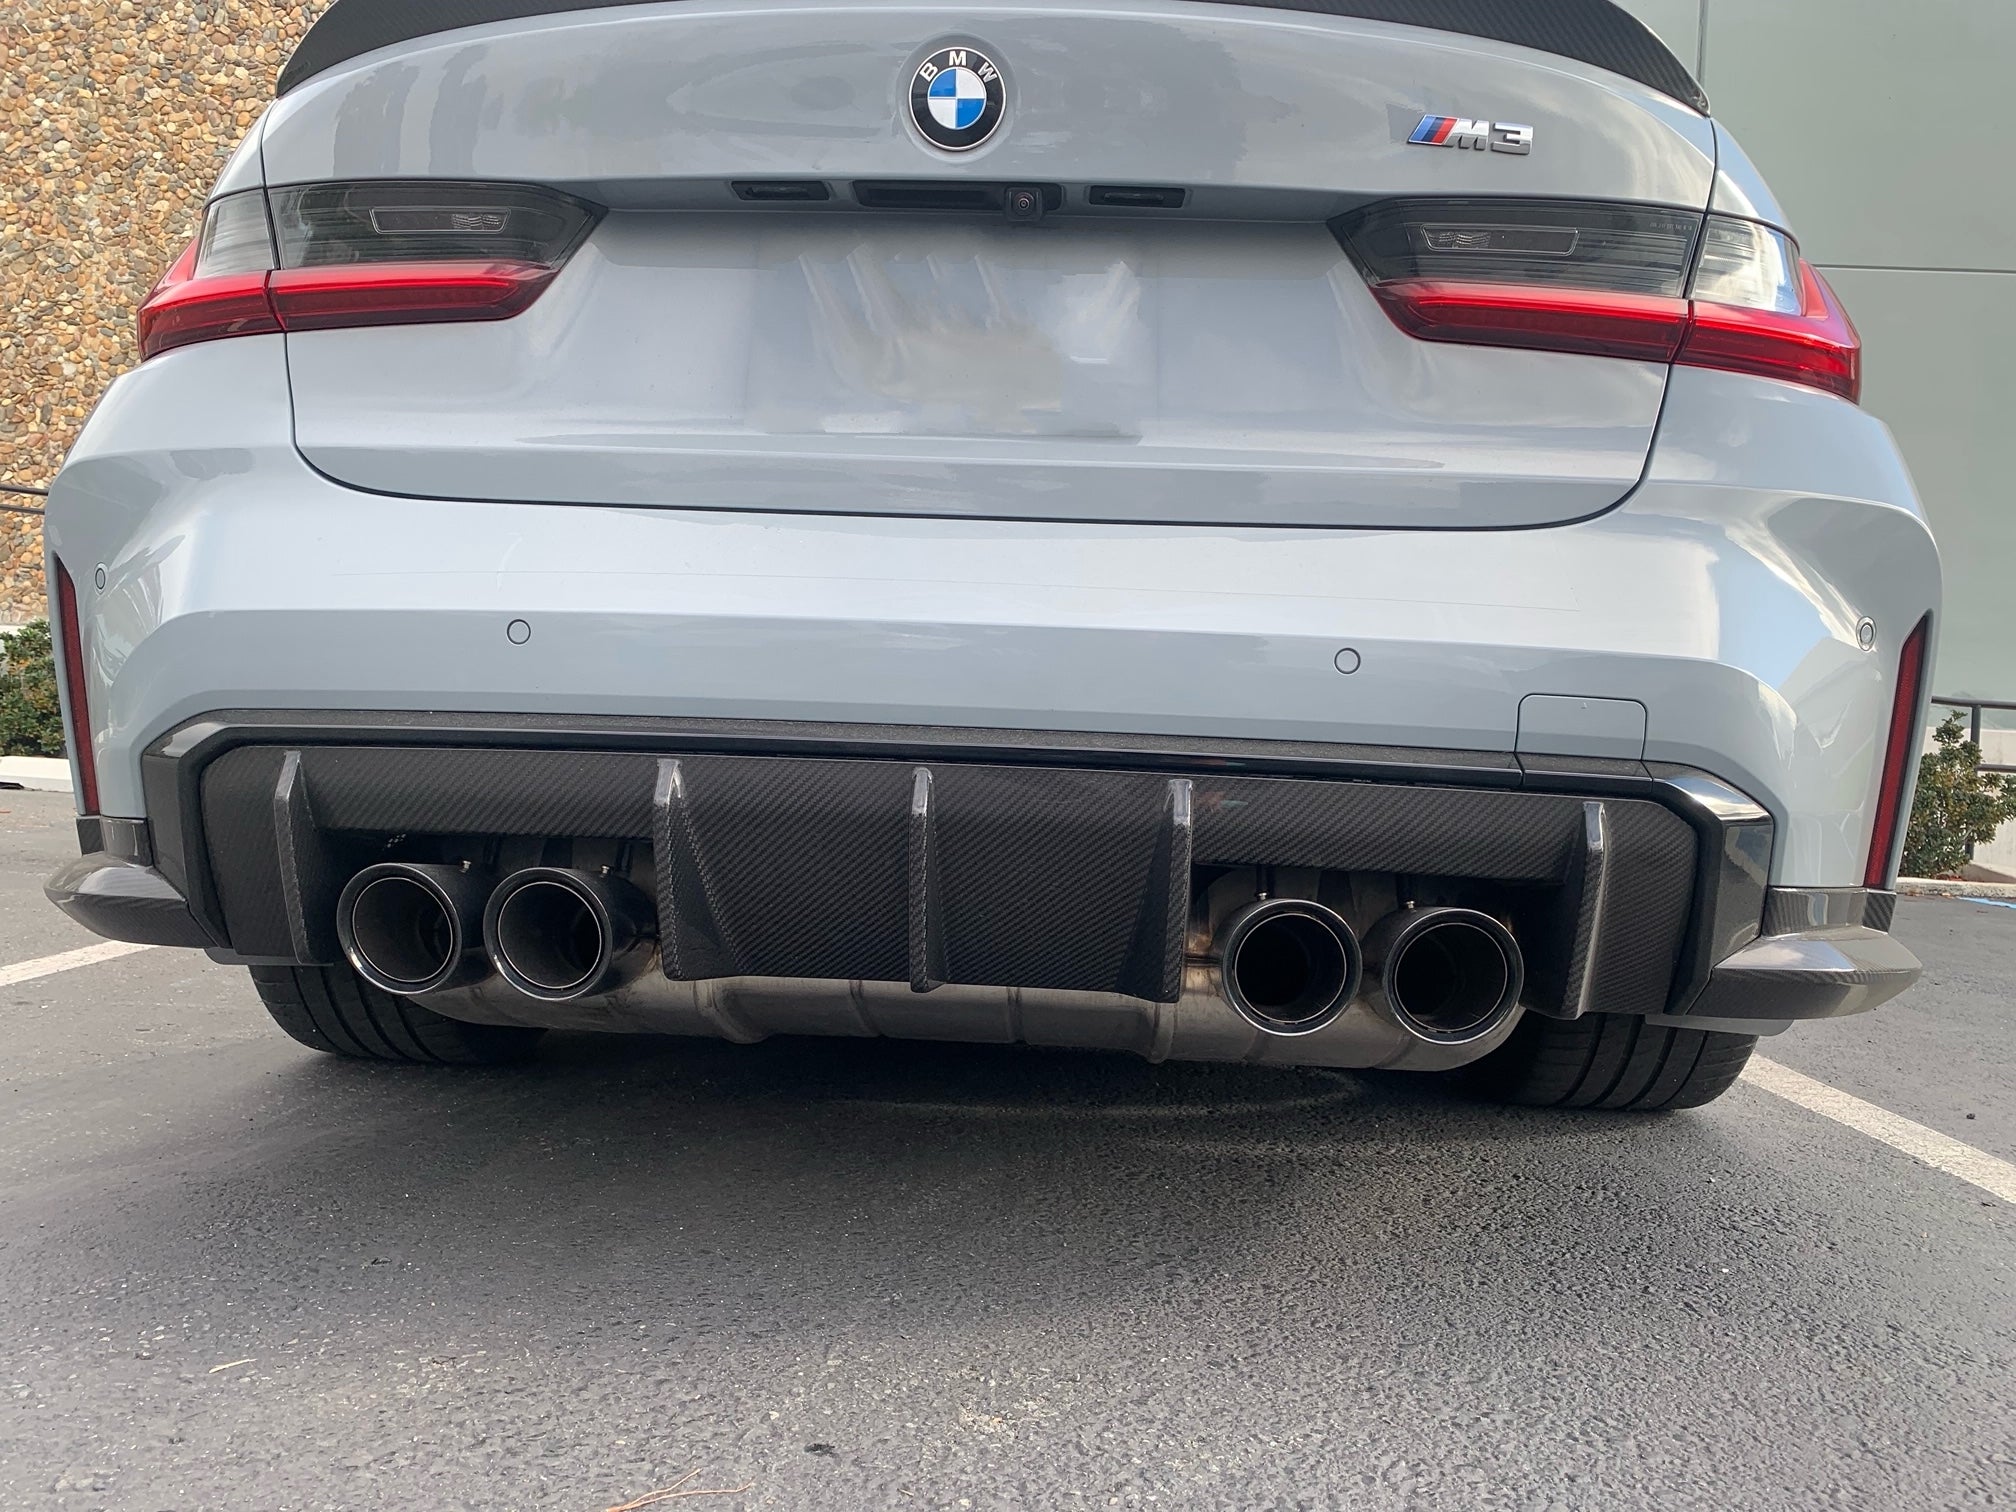 BMW G80/G82 M3/M4 M Power OEM Style Carbon Fibre Rear Diffuser - Manufactured from 100% Carbon Fibre to be a perfect fit for the G80/G82 M3/M4 Models. Taking inspiration from the masters of performance parts BMW with this OEM M Power Rear Diffuser, you will be able to add a unique touch to your new BMW G80/G82 M3/M4 Without adding the expensive M Performance exhaust system. 